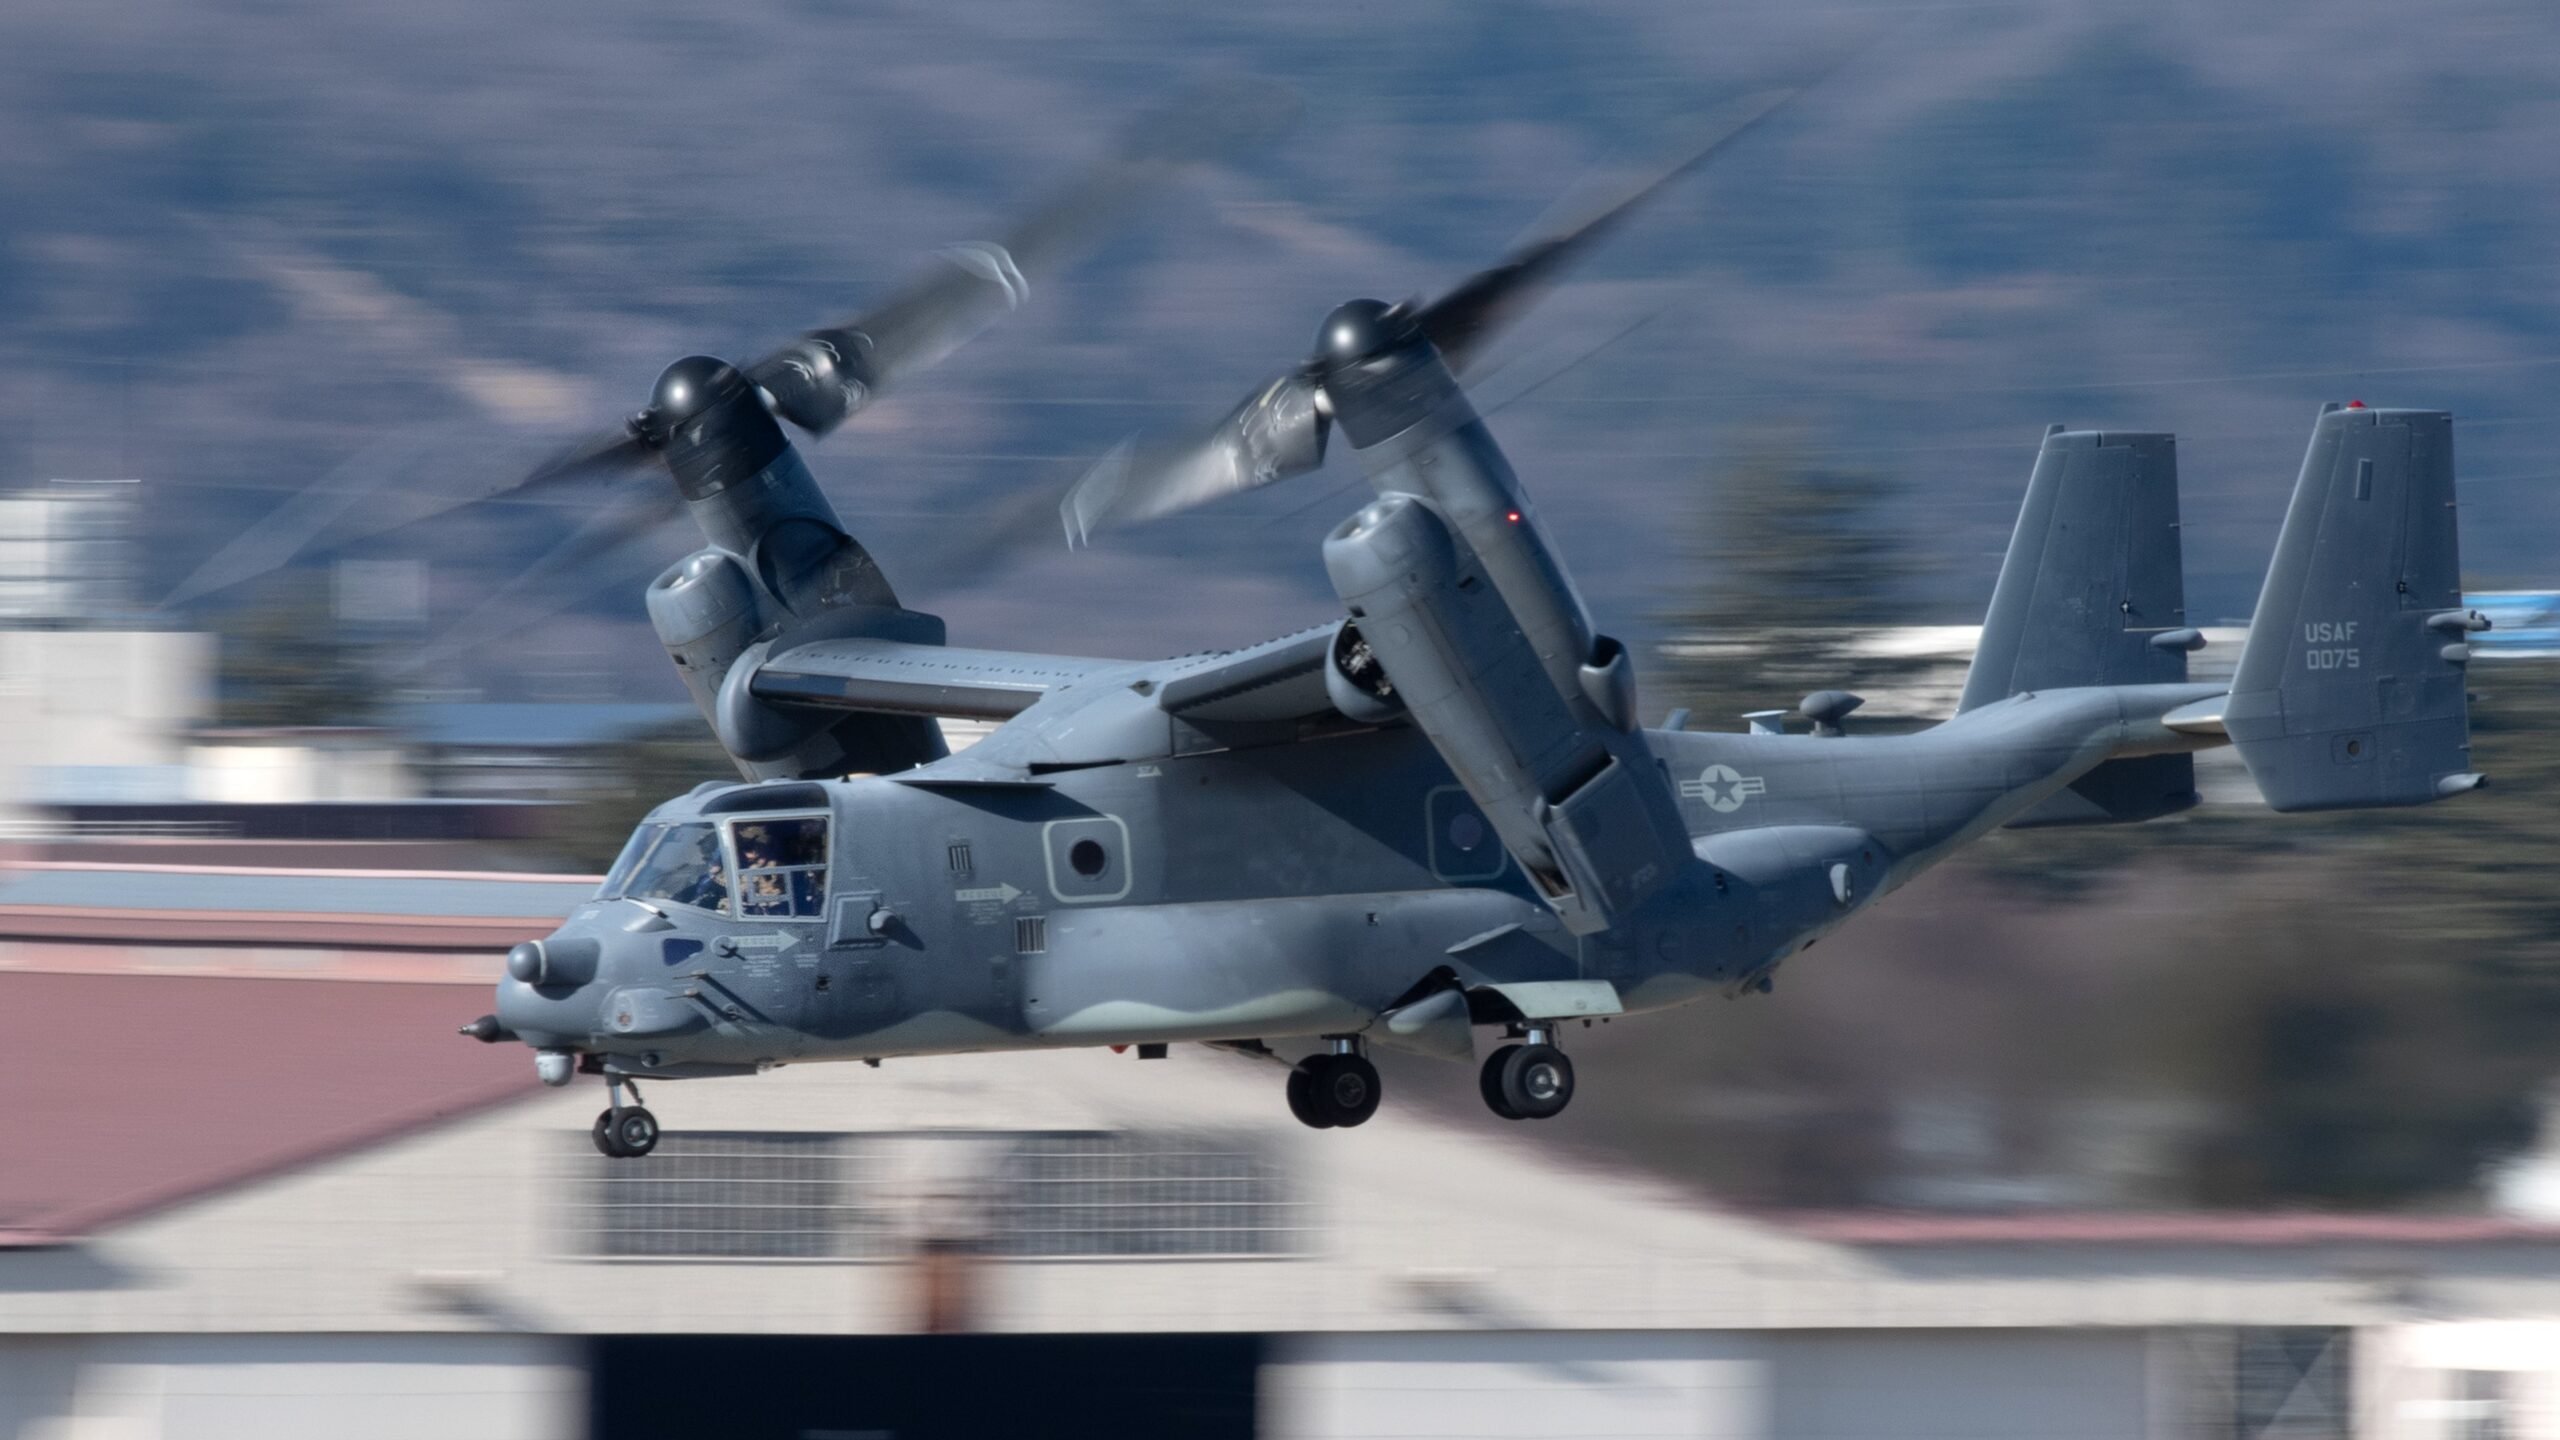 EXCLUSIVE: Air Force Special Operations Command grounds CV-22 Ospreys due to safety issue